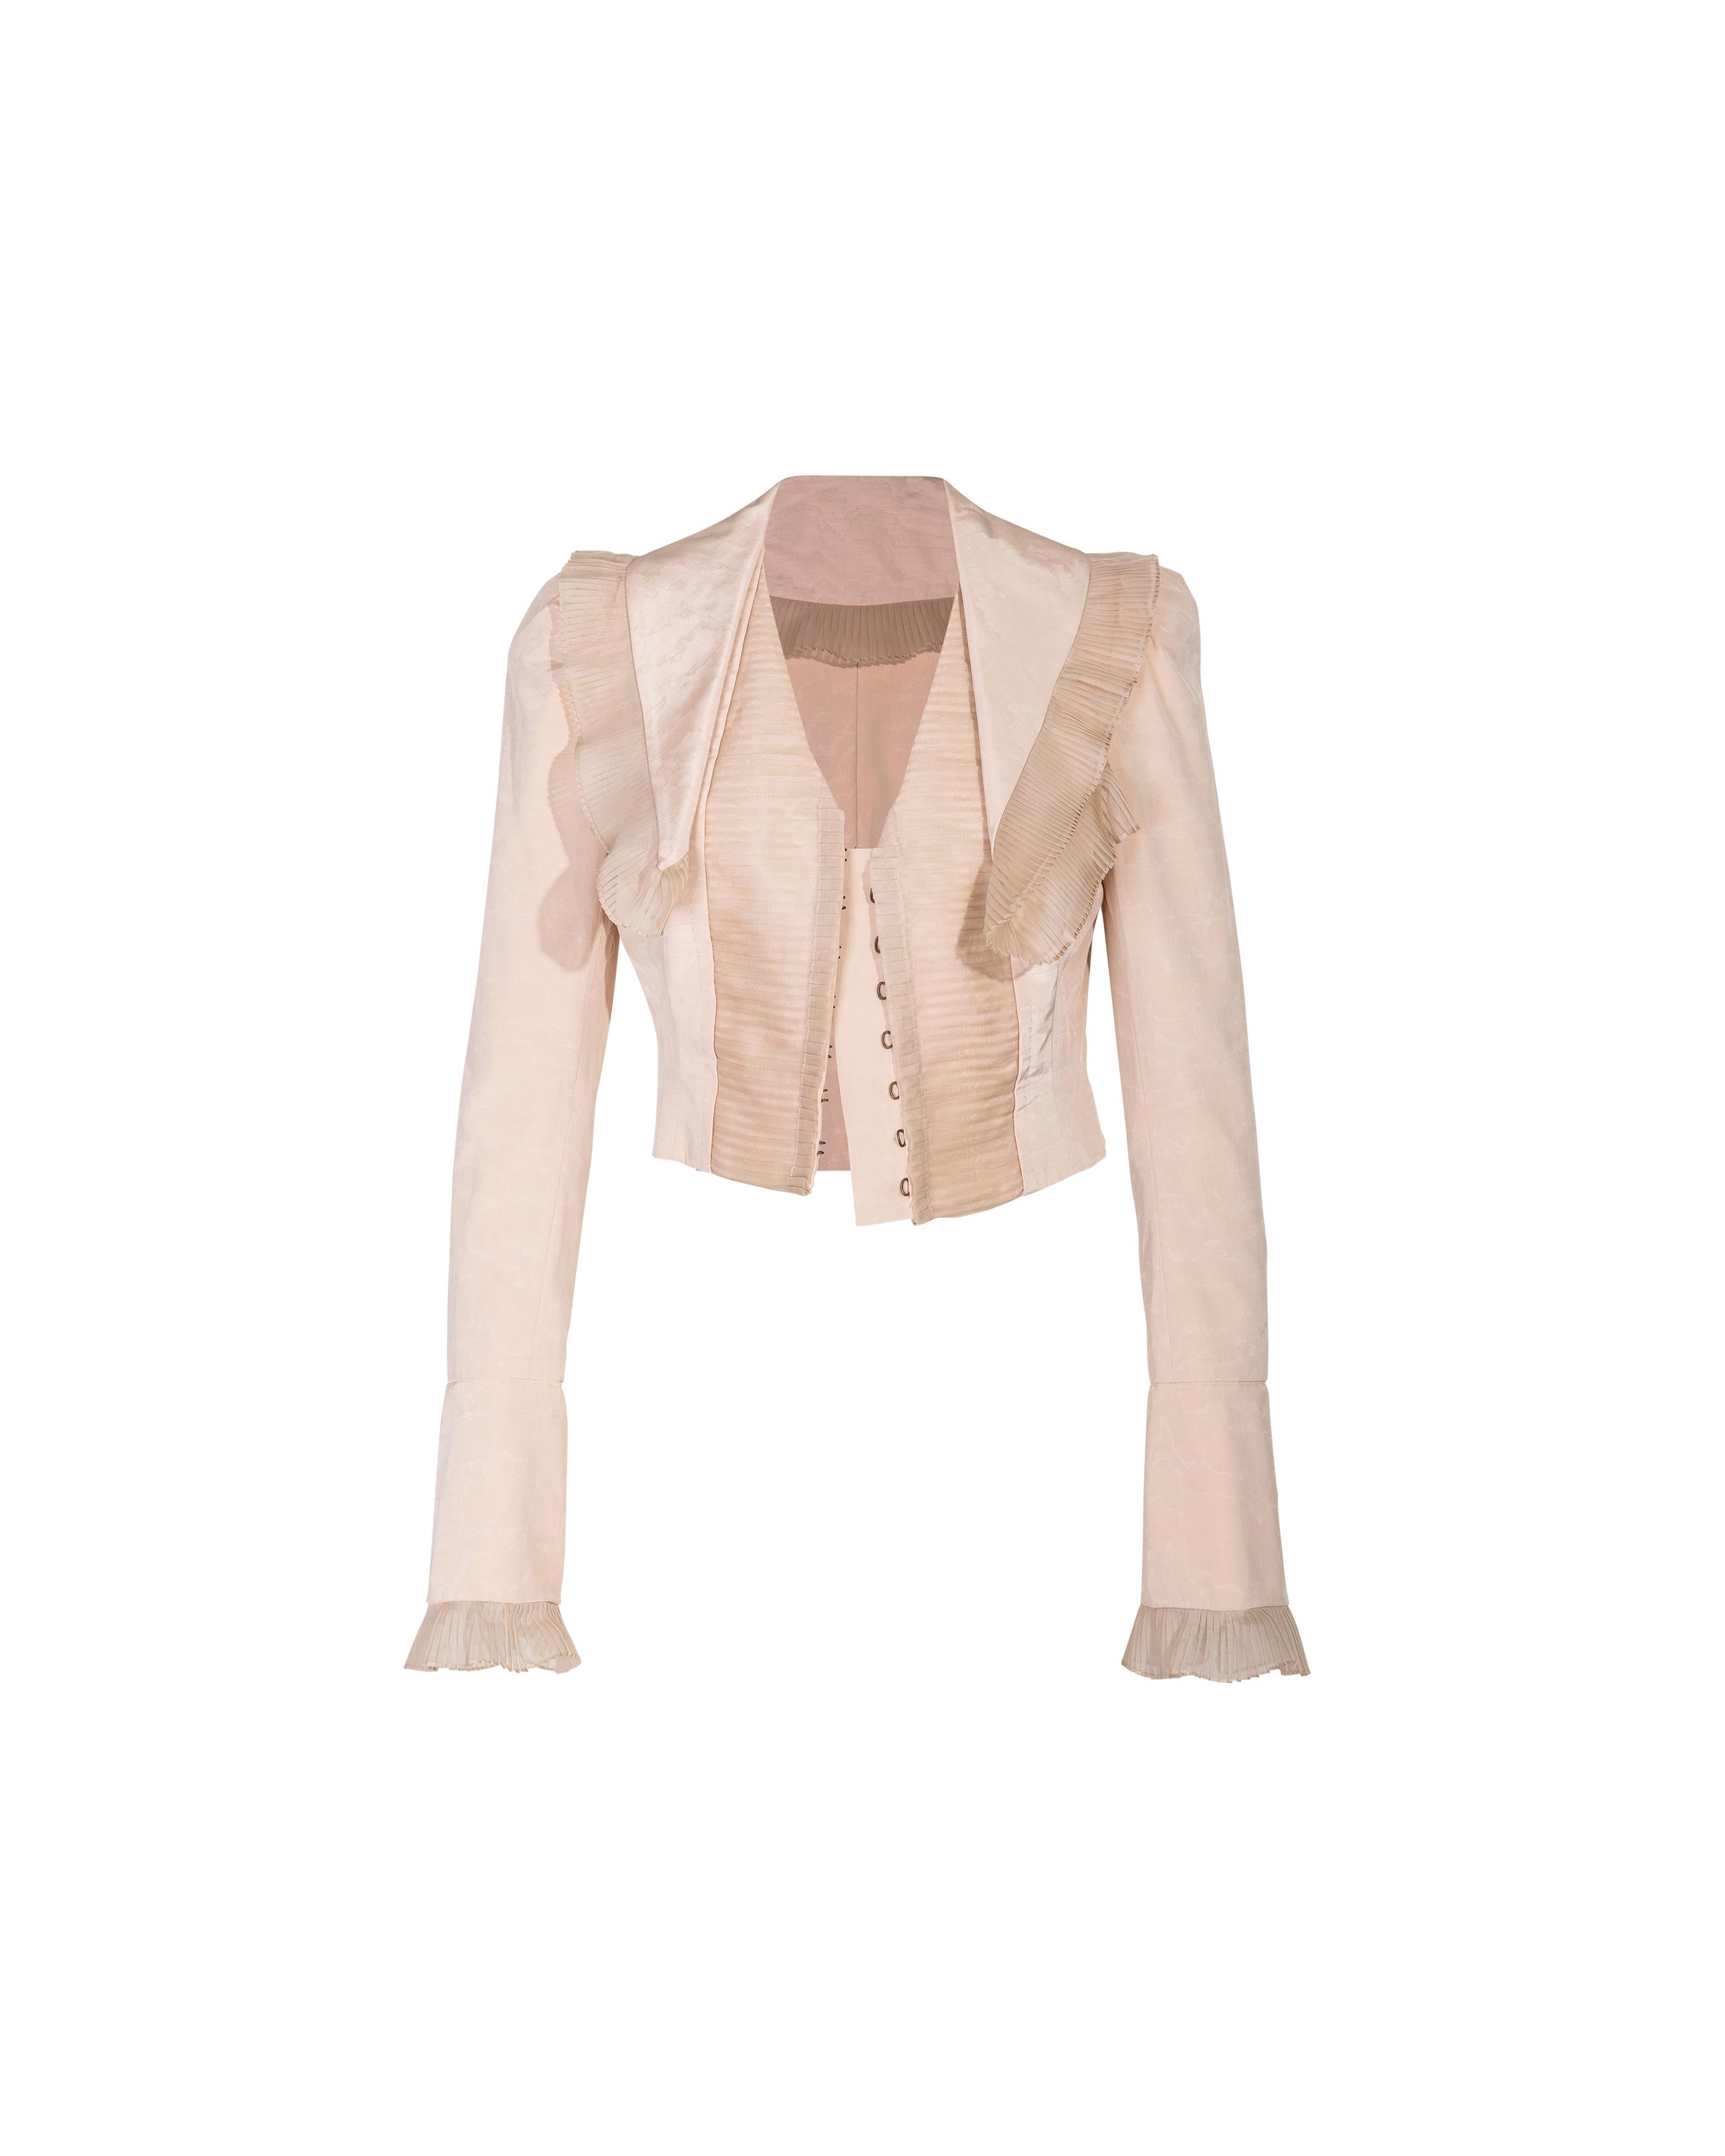 S/S 2007 Alexander McQueen Tan Evening Jacket with Pleated Ruffle Details 3